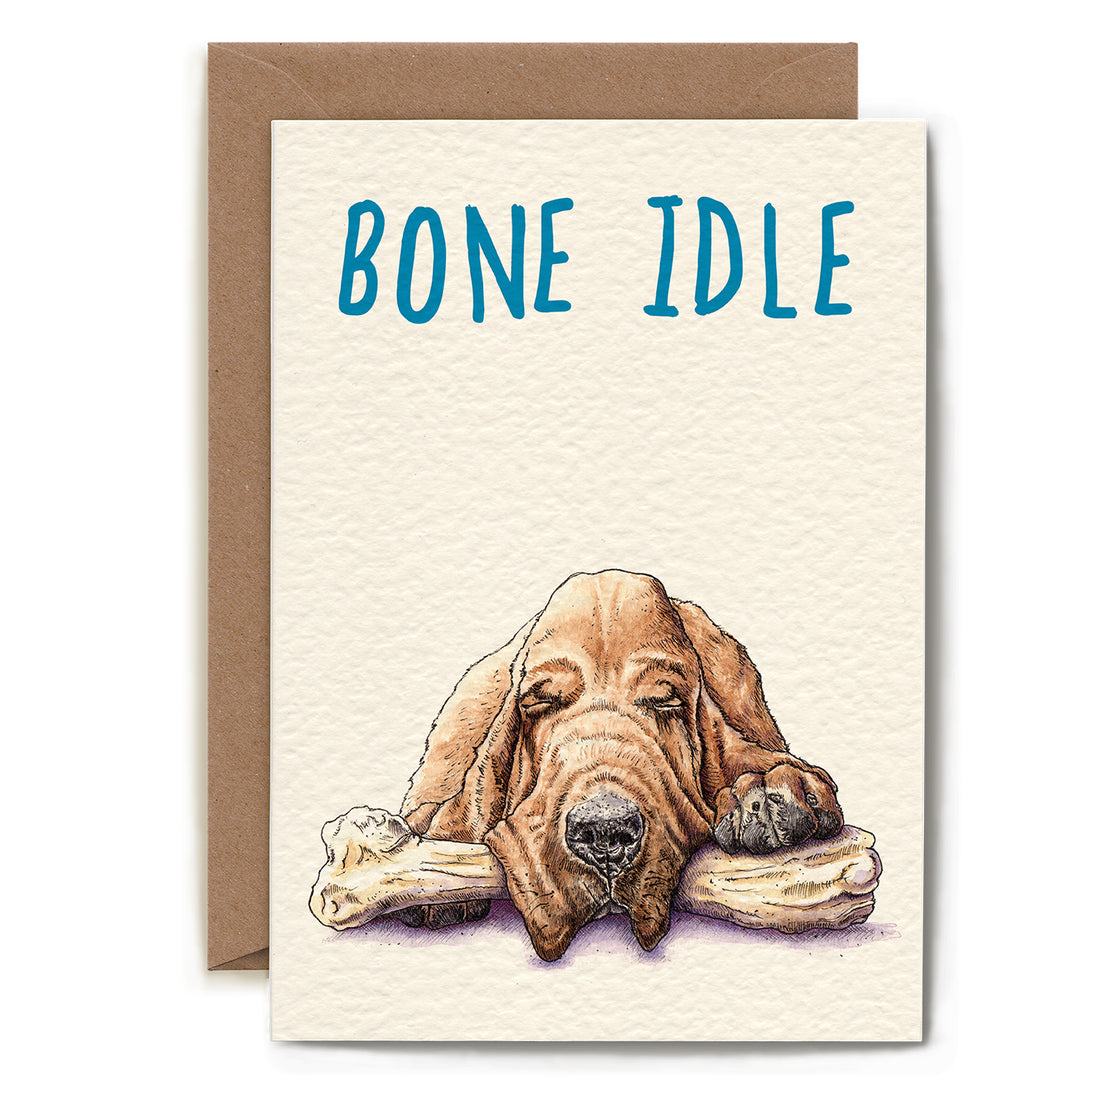 Greeting card featuring a hound dog sleeping on a bone with the pun &quot;bone idle&quot; written at the top in blue.